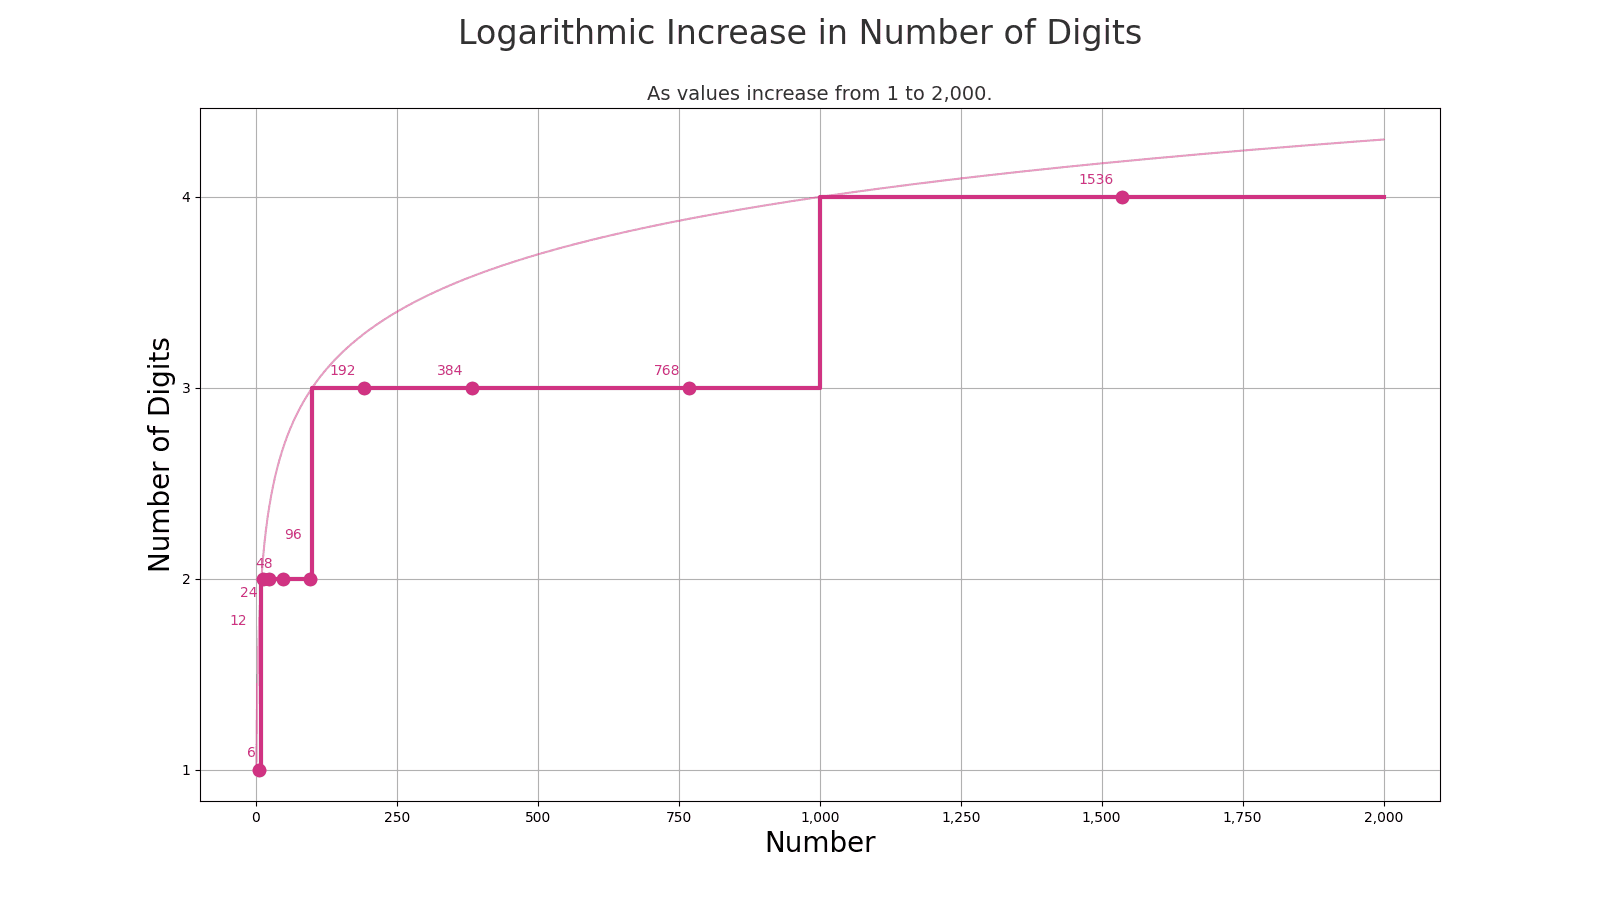 Logarithmic growth in number of digits to 2,000.